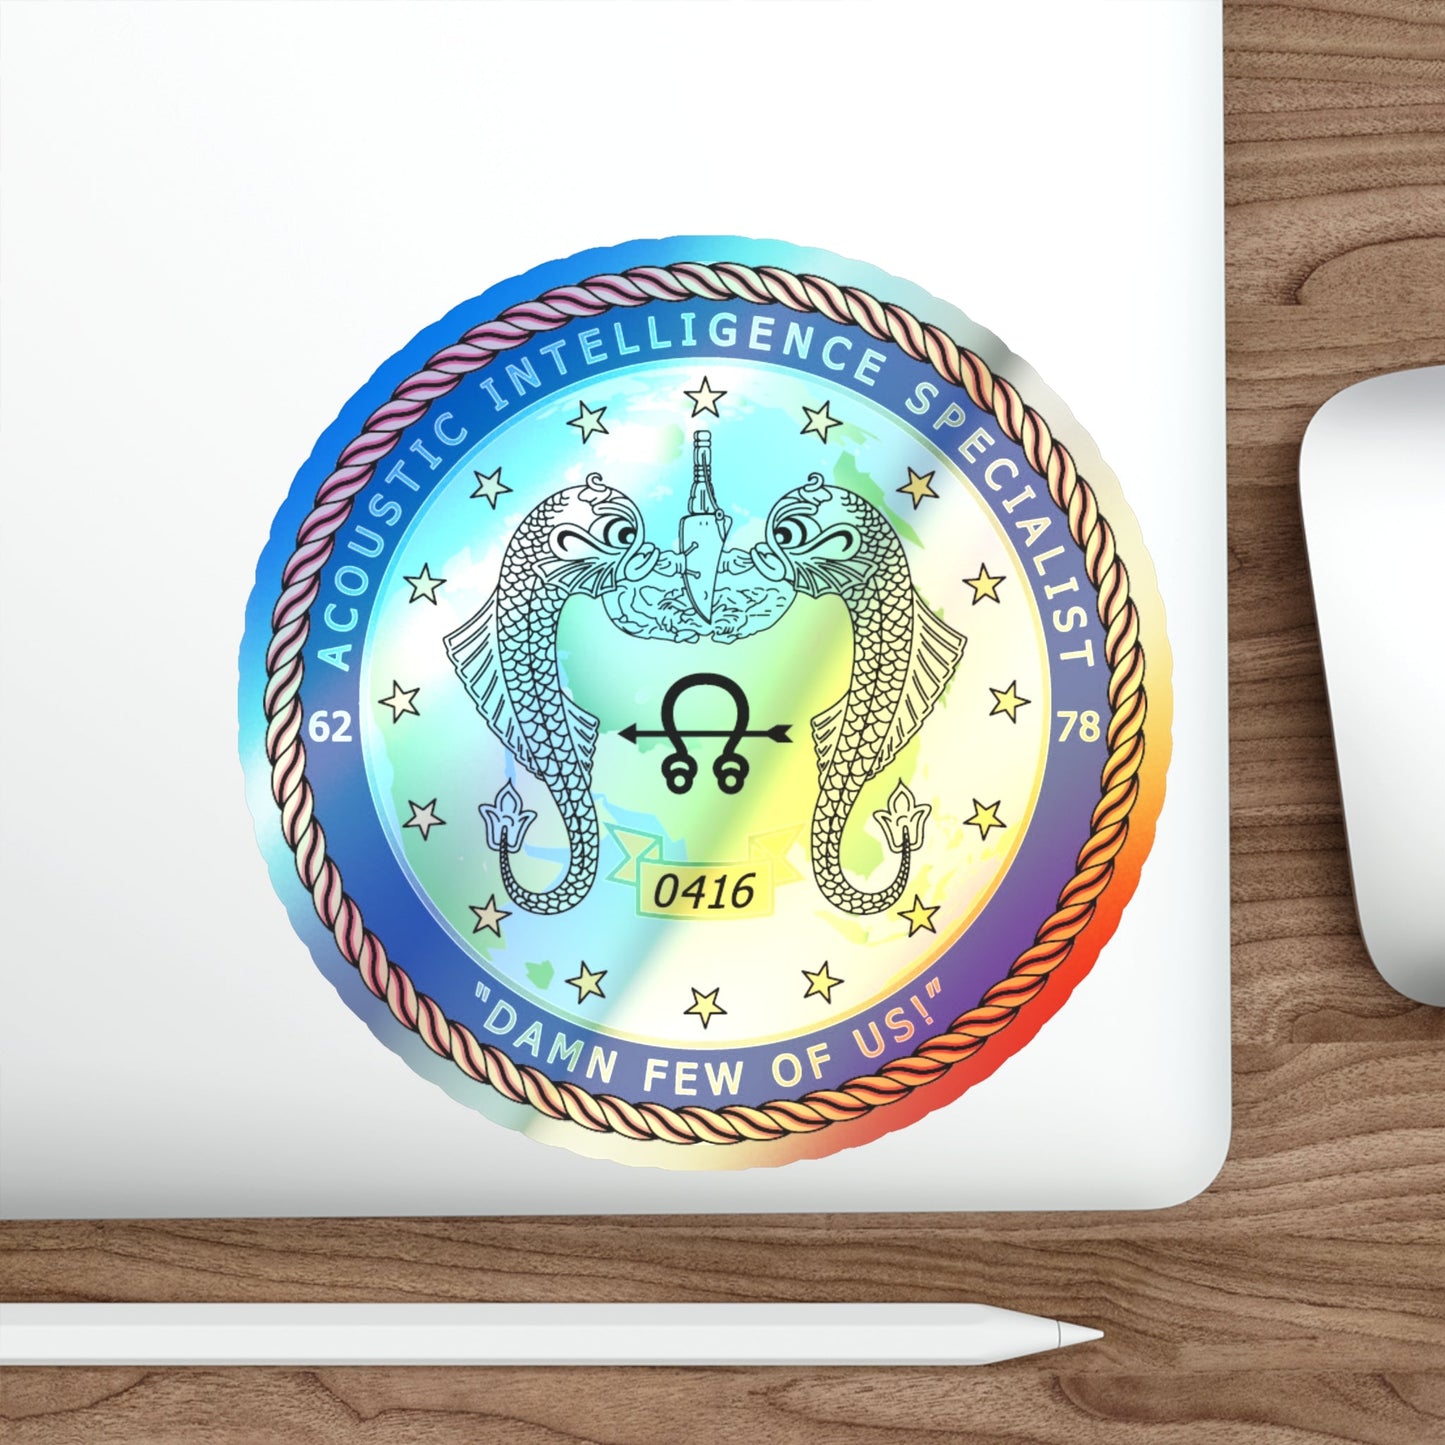 ACINT Specialist Acoustic Intelligence Specialist (U.S. Navy) Holographic STICKER Die-Cut Vinyl Decal-The Sticker Space